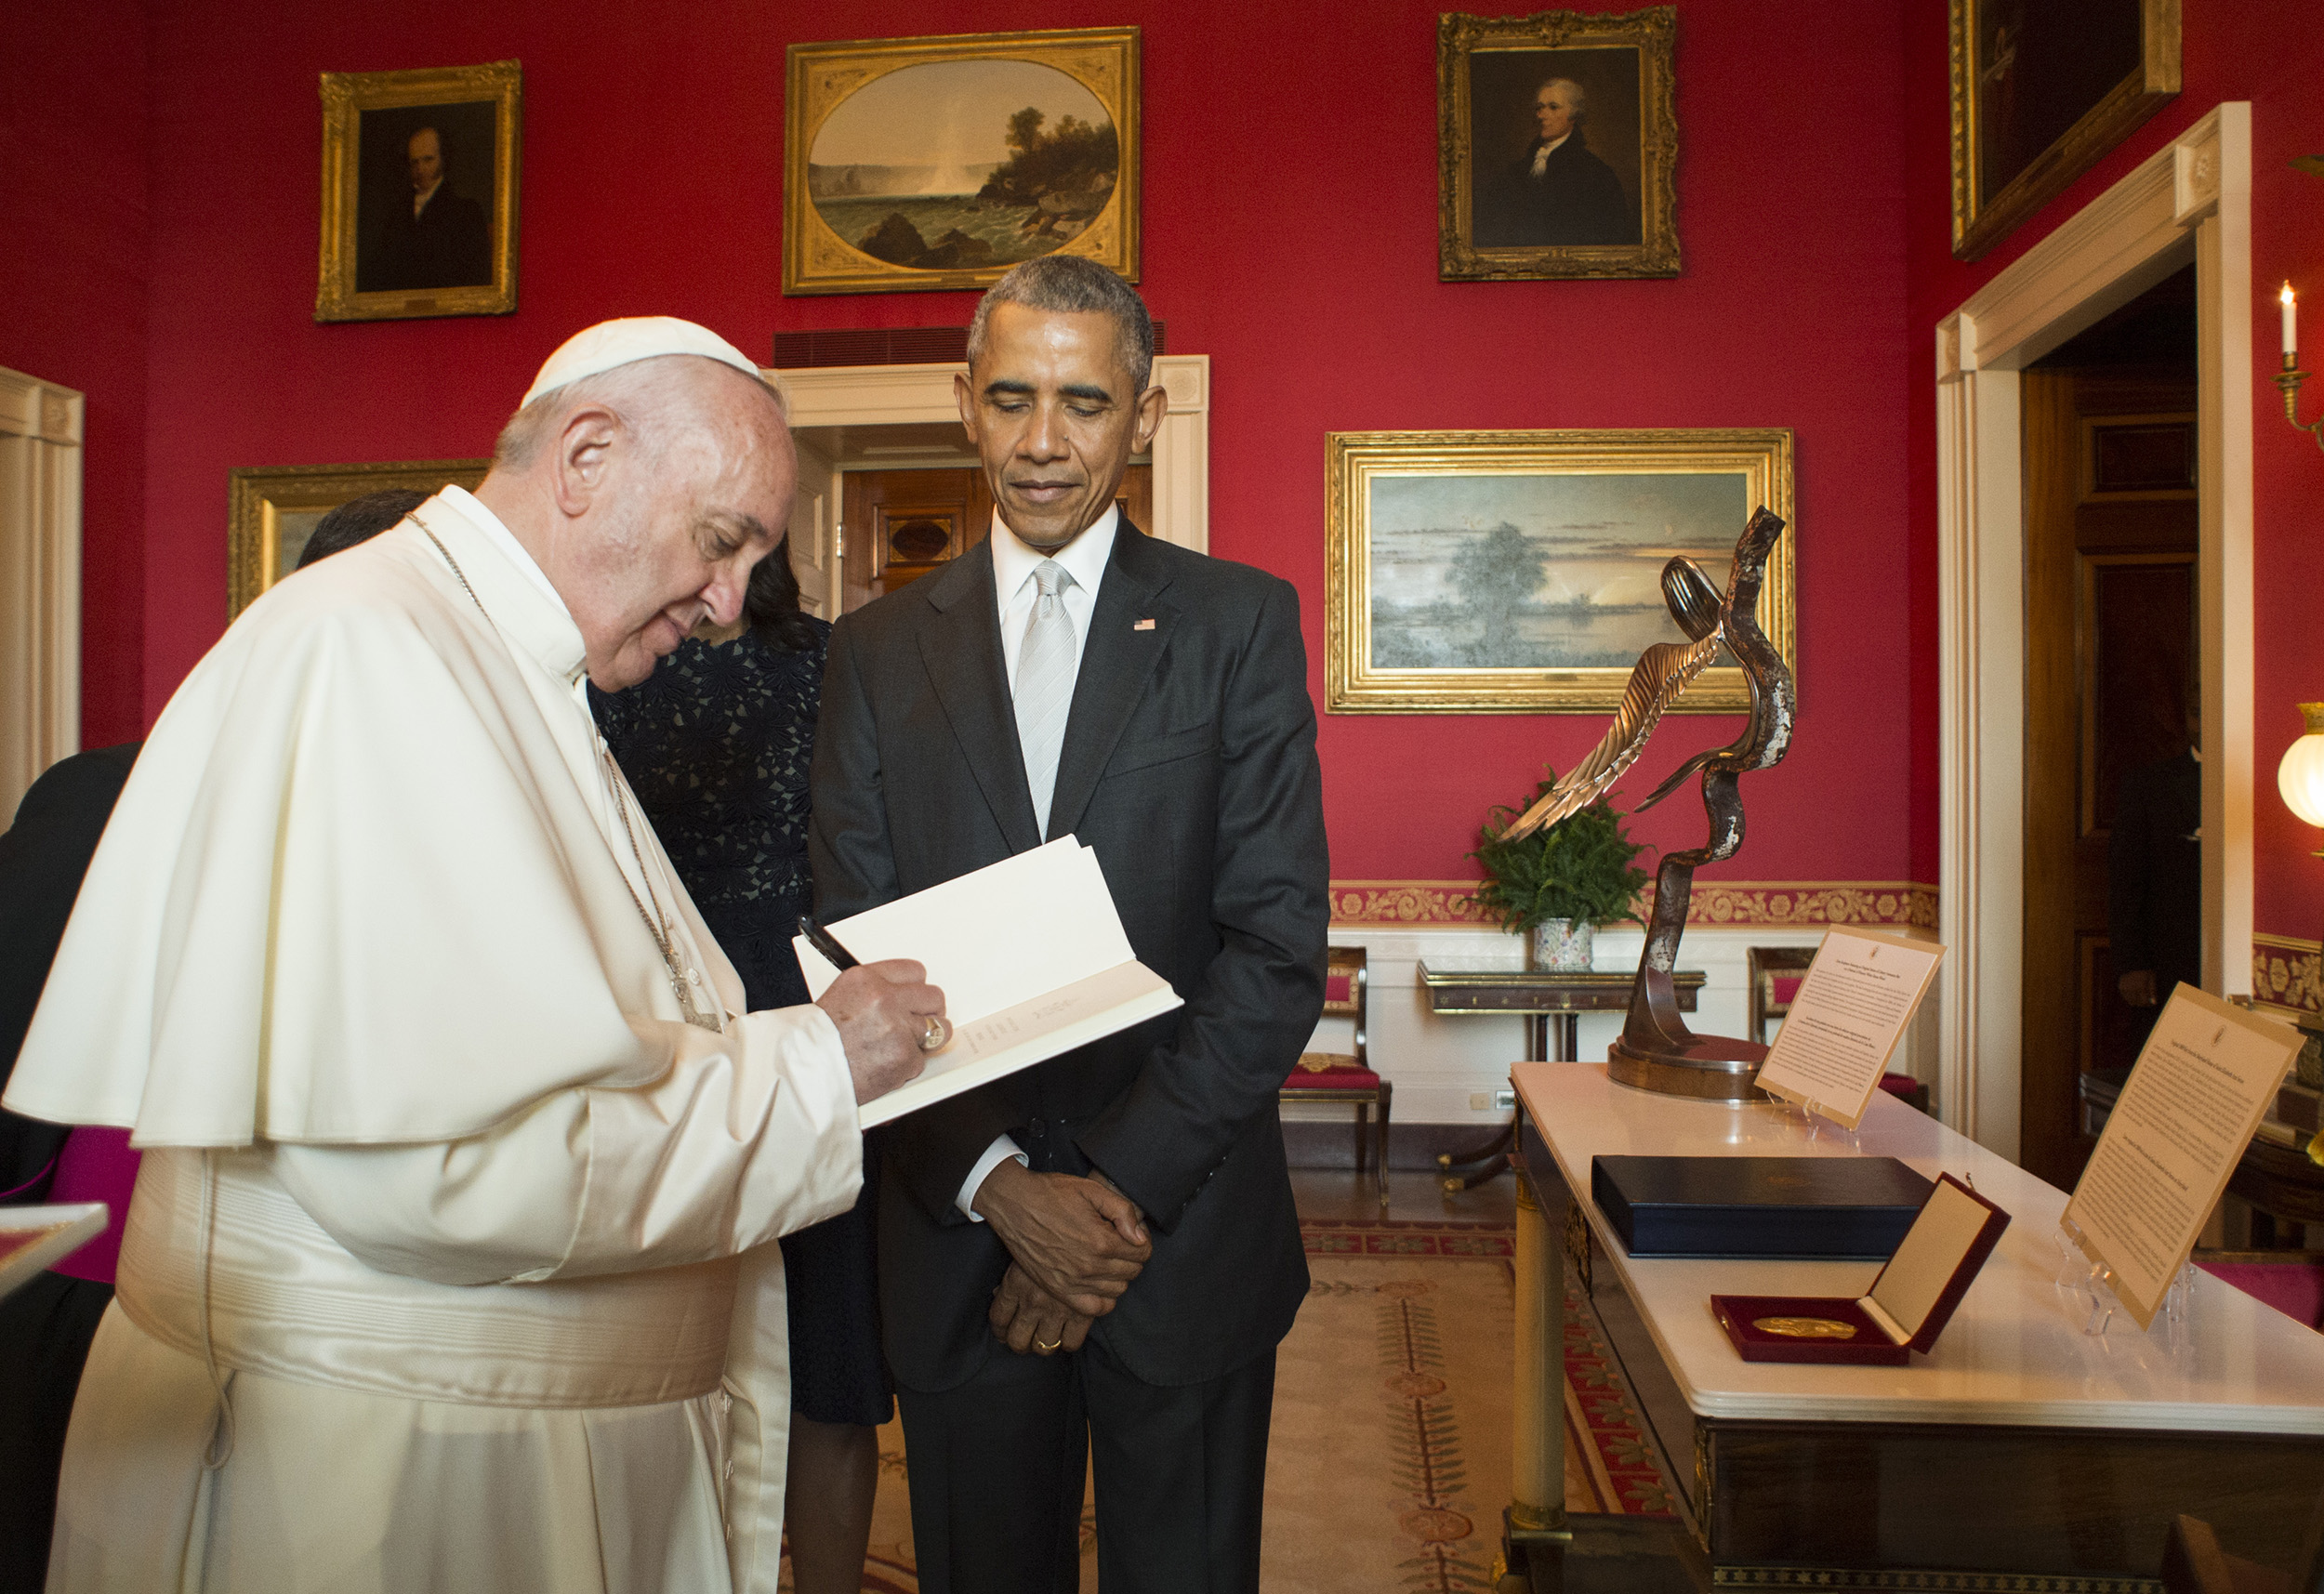 PHOTO: In this photo provided by L'Osservatore Romano, Pope Francis signs a guest book as President Barack Obama looks on at the White House in Washington, Sept. 23, 2015.